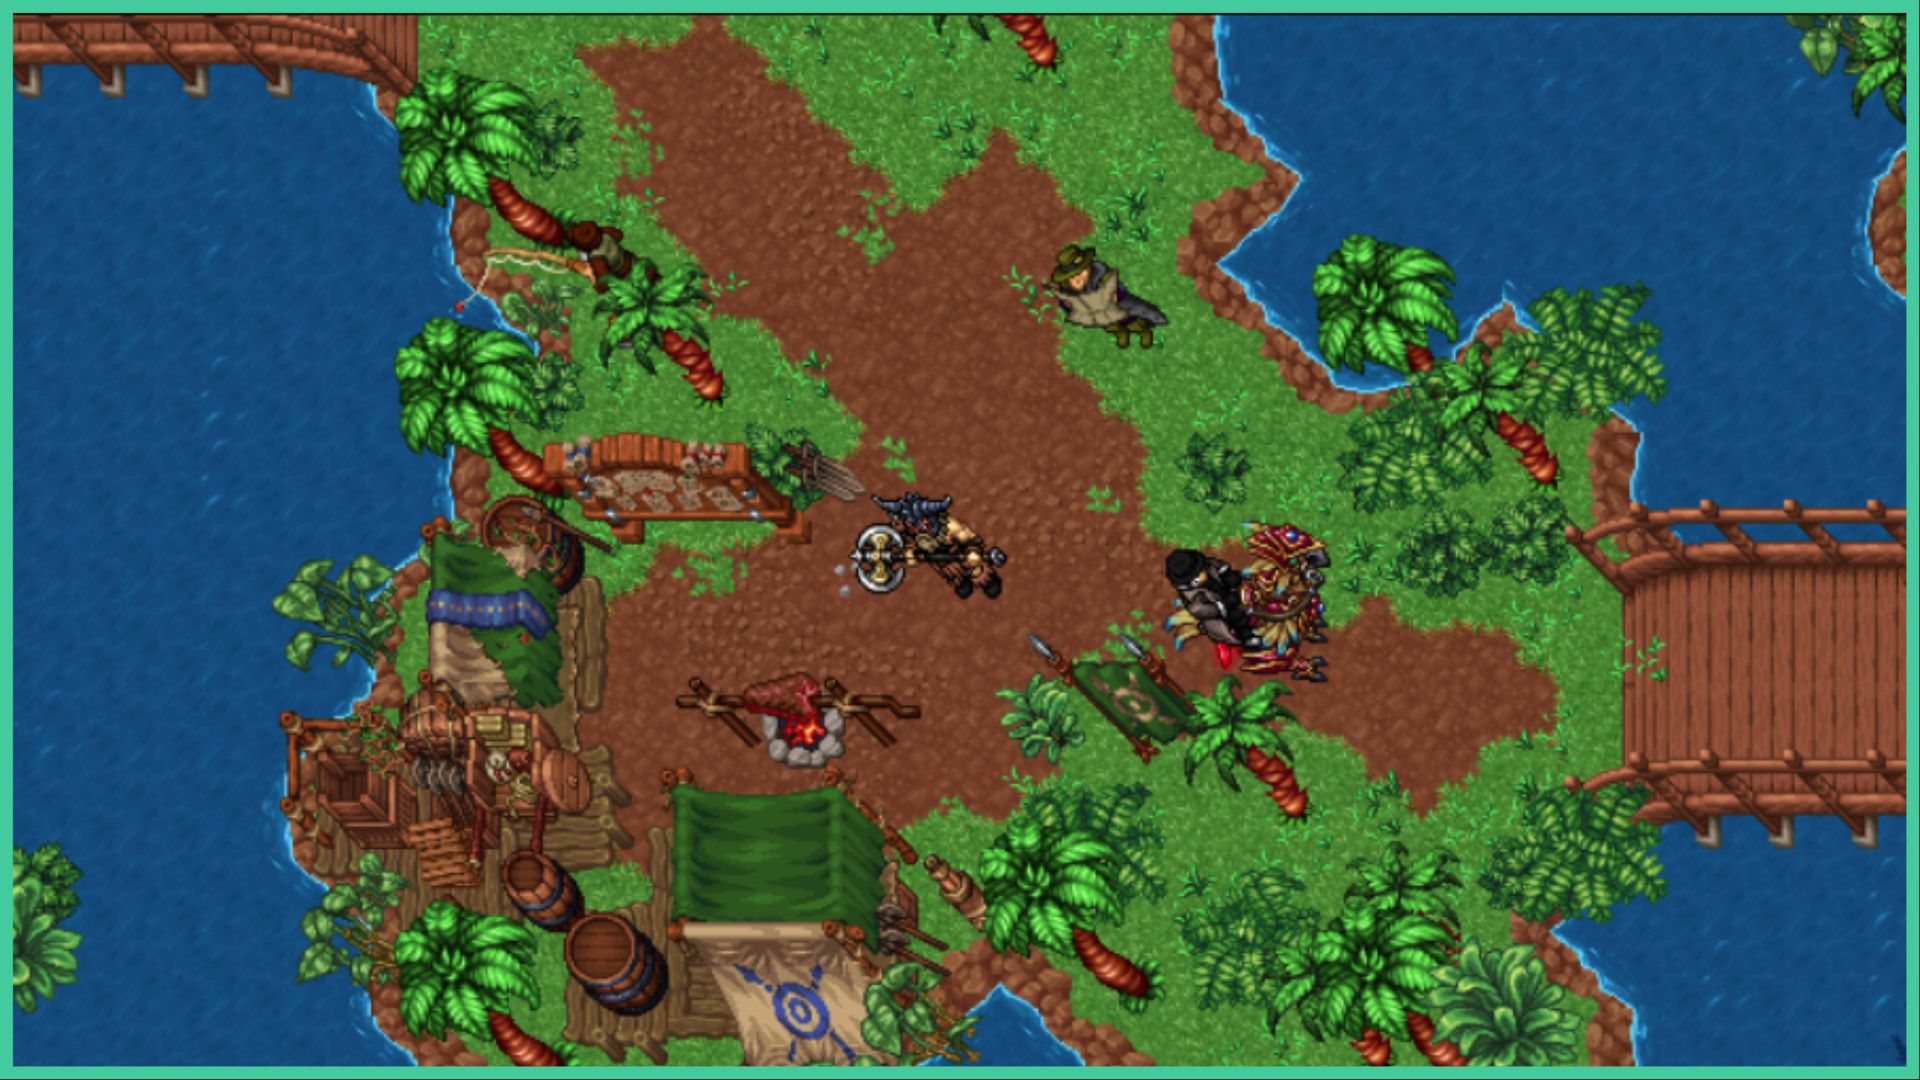 feature image for our ravendawn tier list, the image features a screenshot from the game of a top-down view of characters standing at what looks to be a camp, with meat roasting on a fire, a character looking at a map, a warrior holding an axe, someone fishing by the waterside, and a character sat on a bird mount, they are surrounded by trees and water, with two bridges on either side